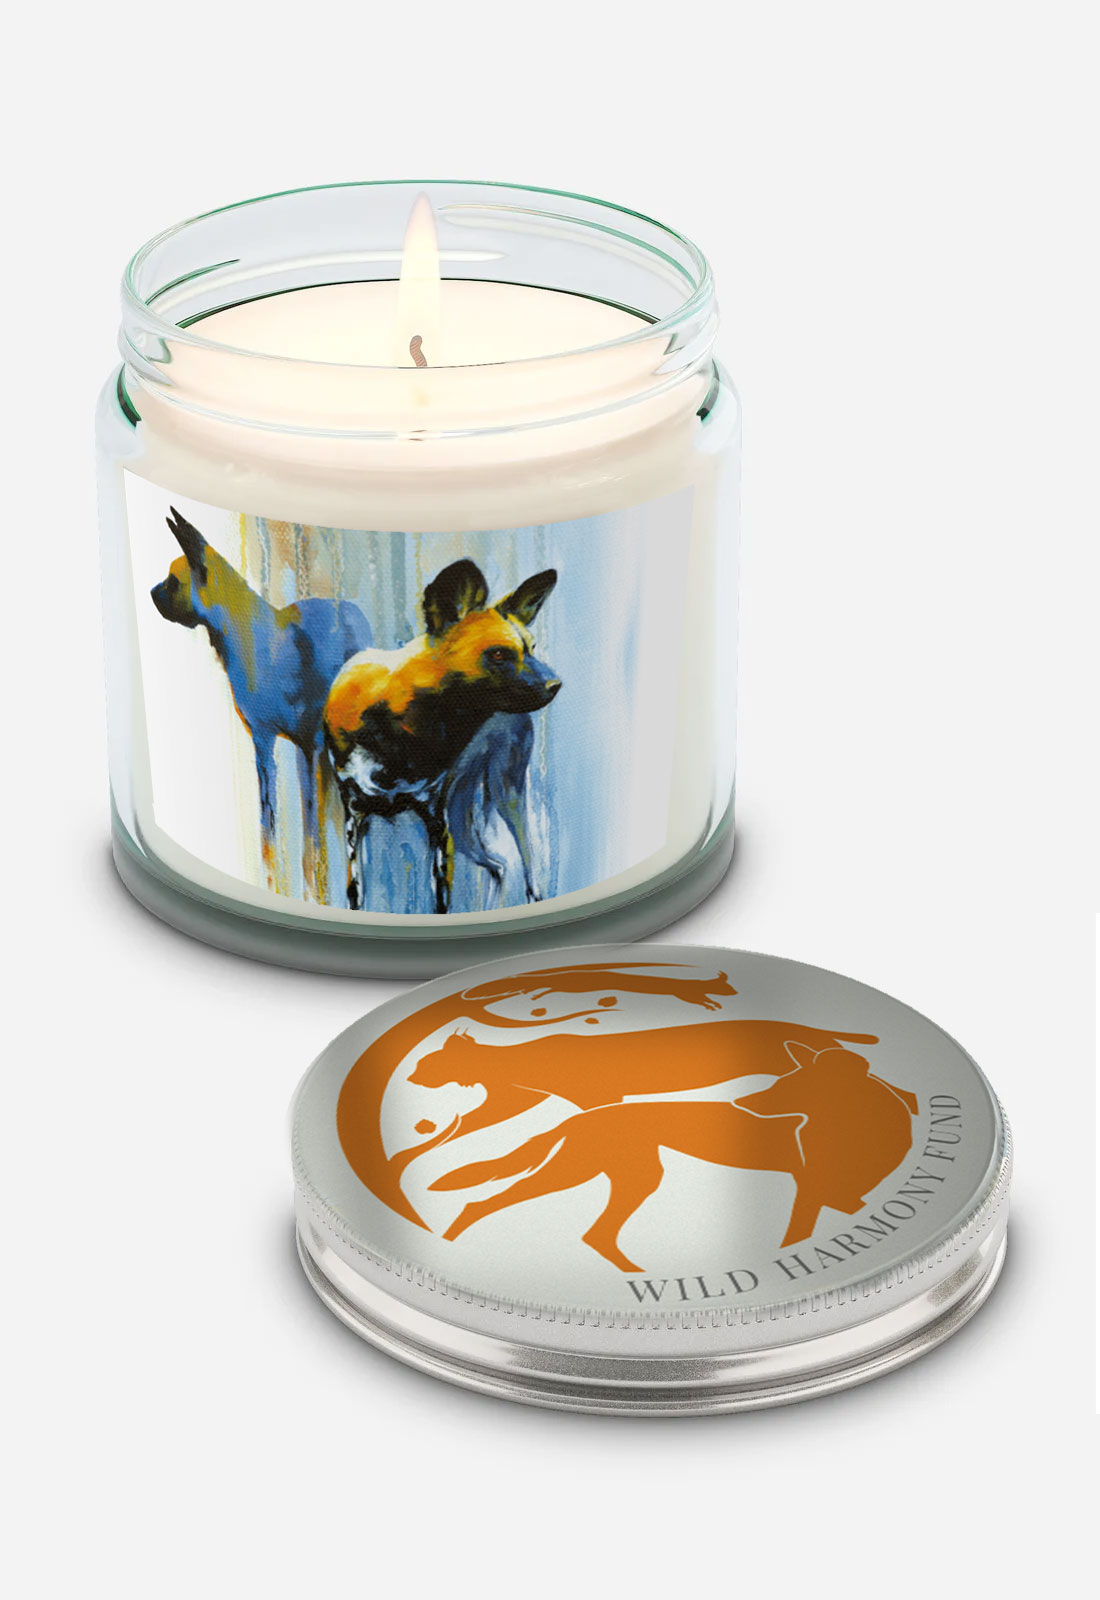 Main image for Painted Dogs Candle